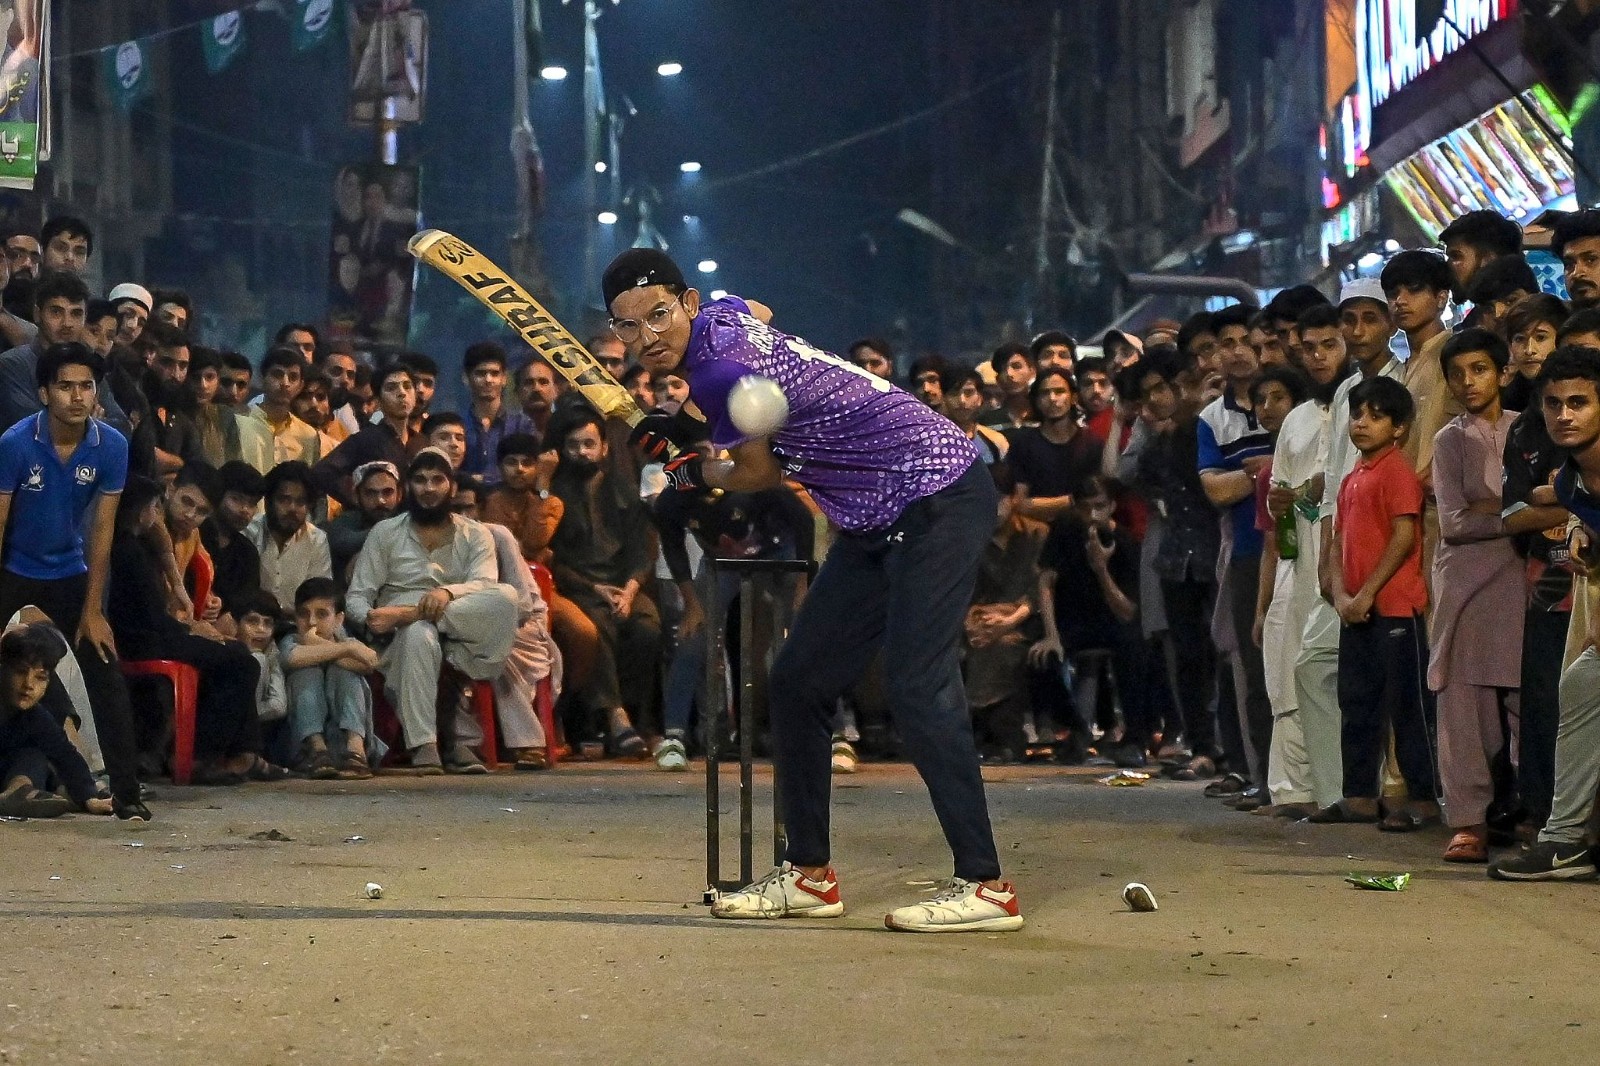 A youngster bats at a tape ball night cricket match as spectators watch during the Islamic holy month of Ramadan in Karachi, Pakistan, on March 27, 2024. Cricket enjoys immense popularity in South Asia. /CFP